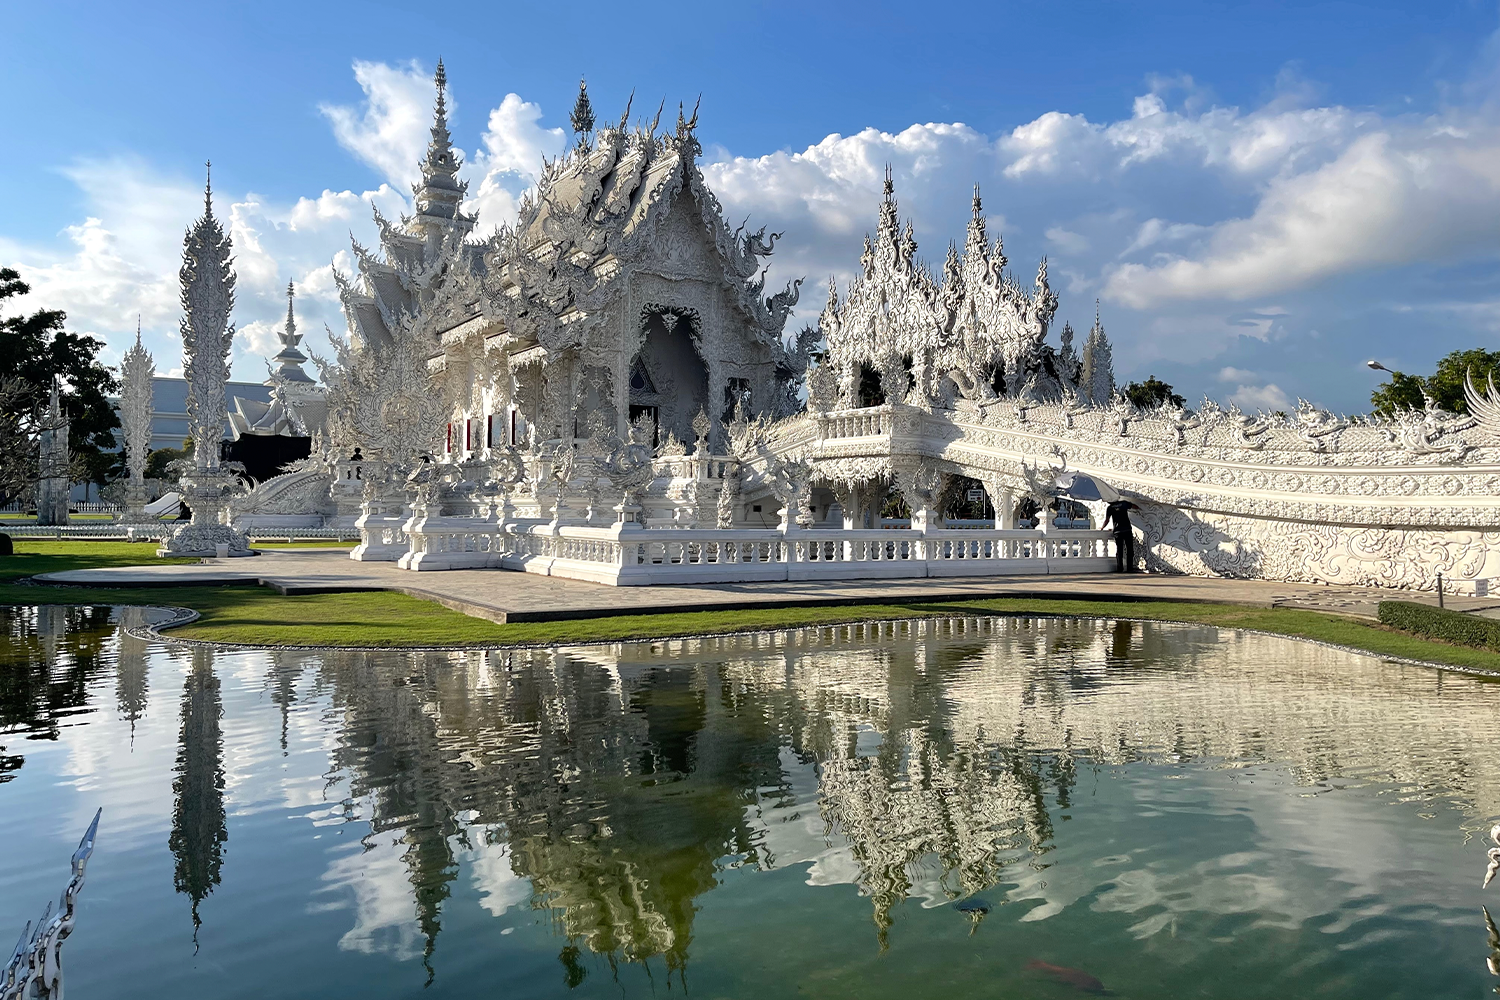 Chiang Rai's white temple is an Instagram favorite